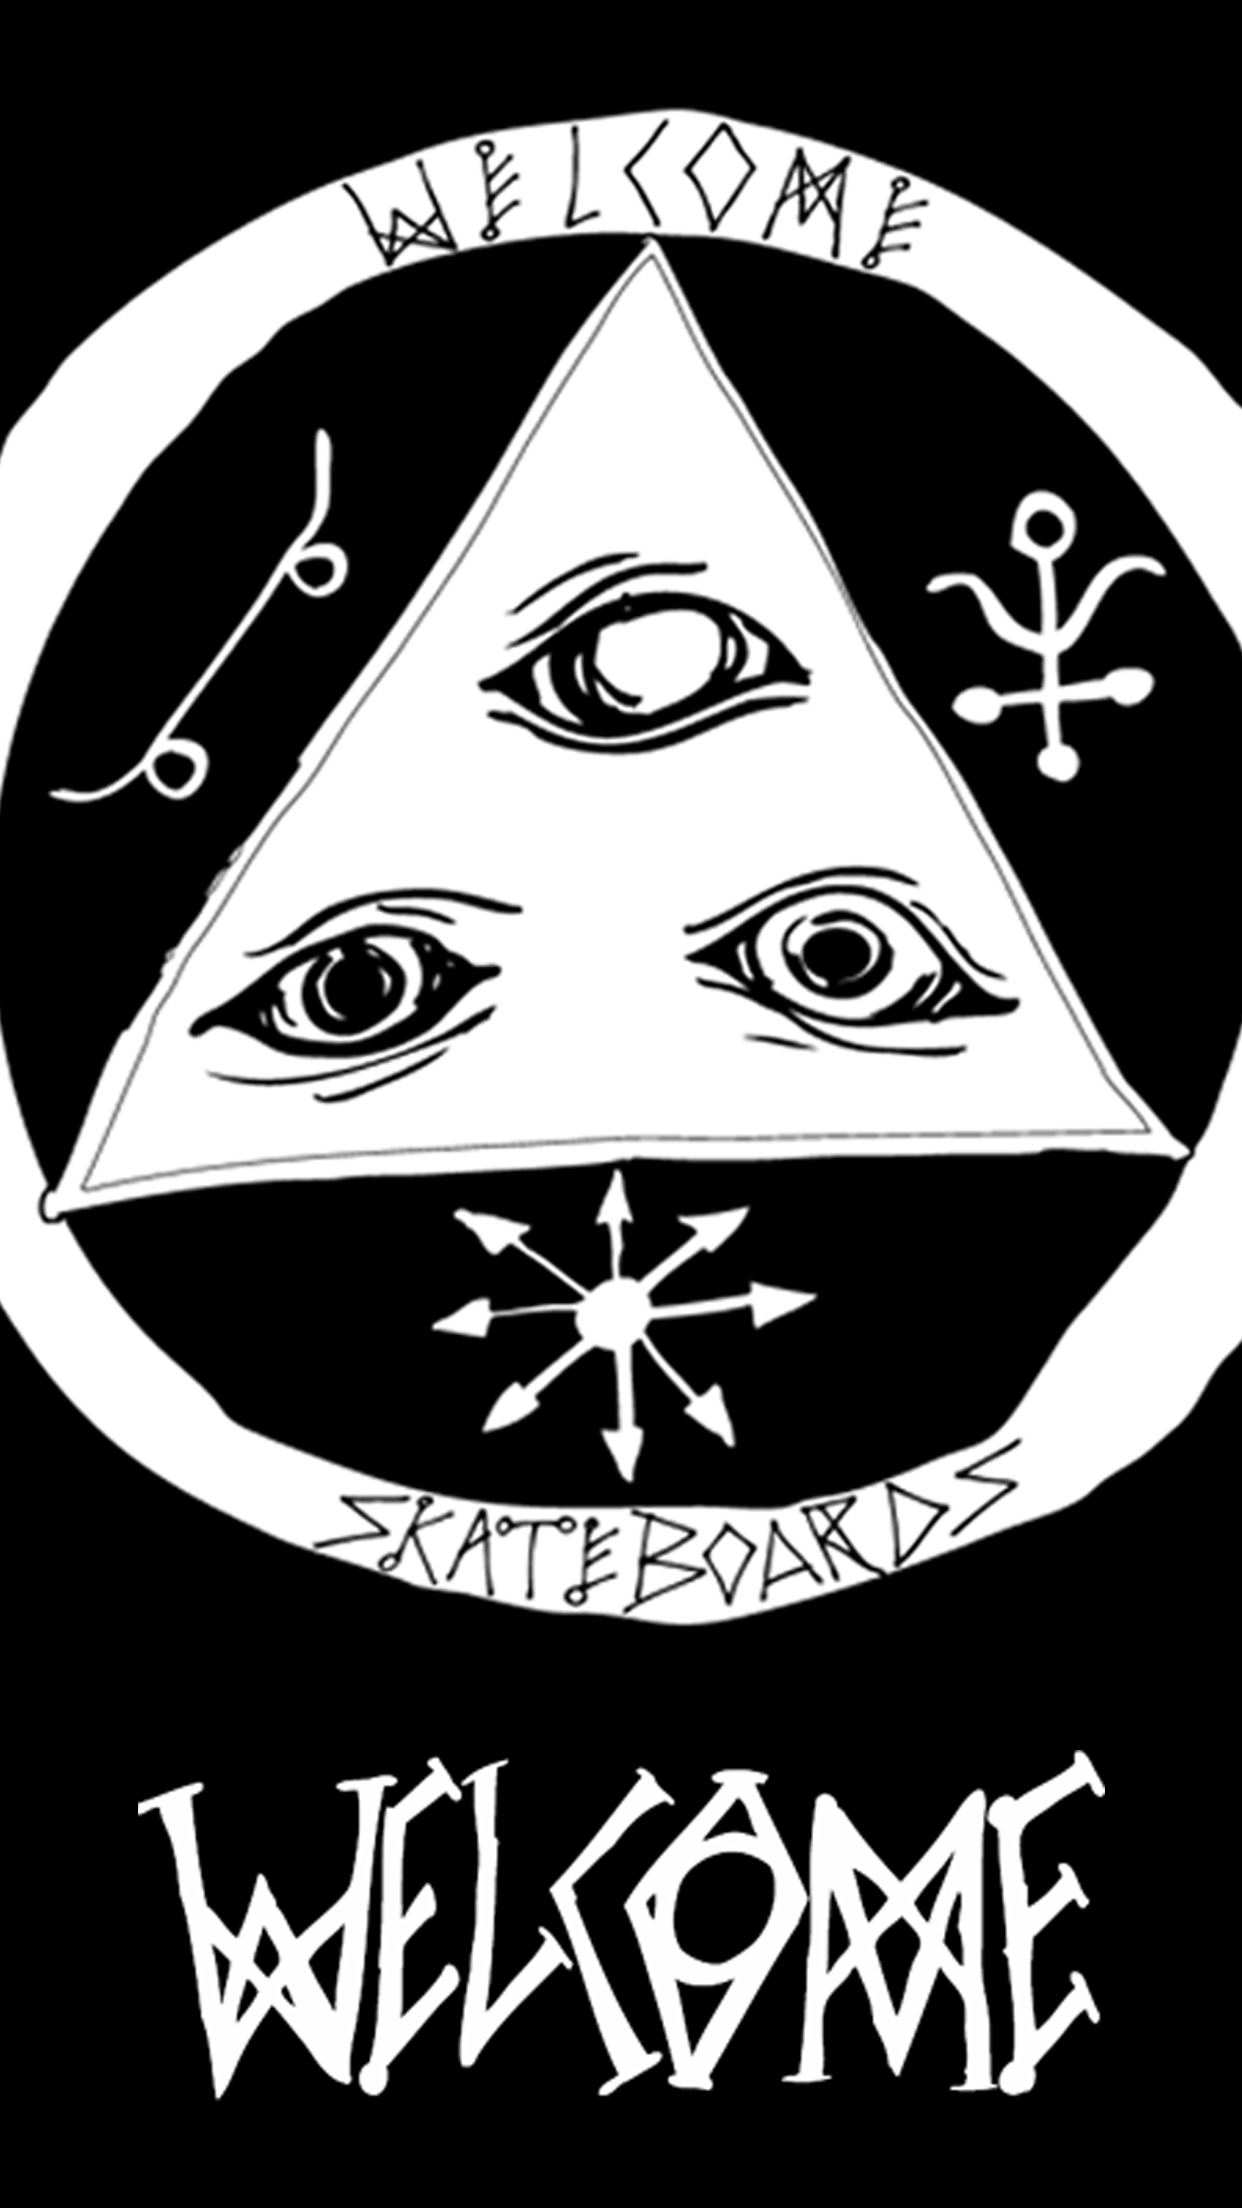 Triangle Skate Logo - Welcome Skateboards Black and White iPhone 6S Wallpaper | Joms ...